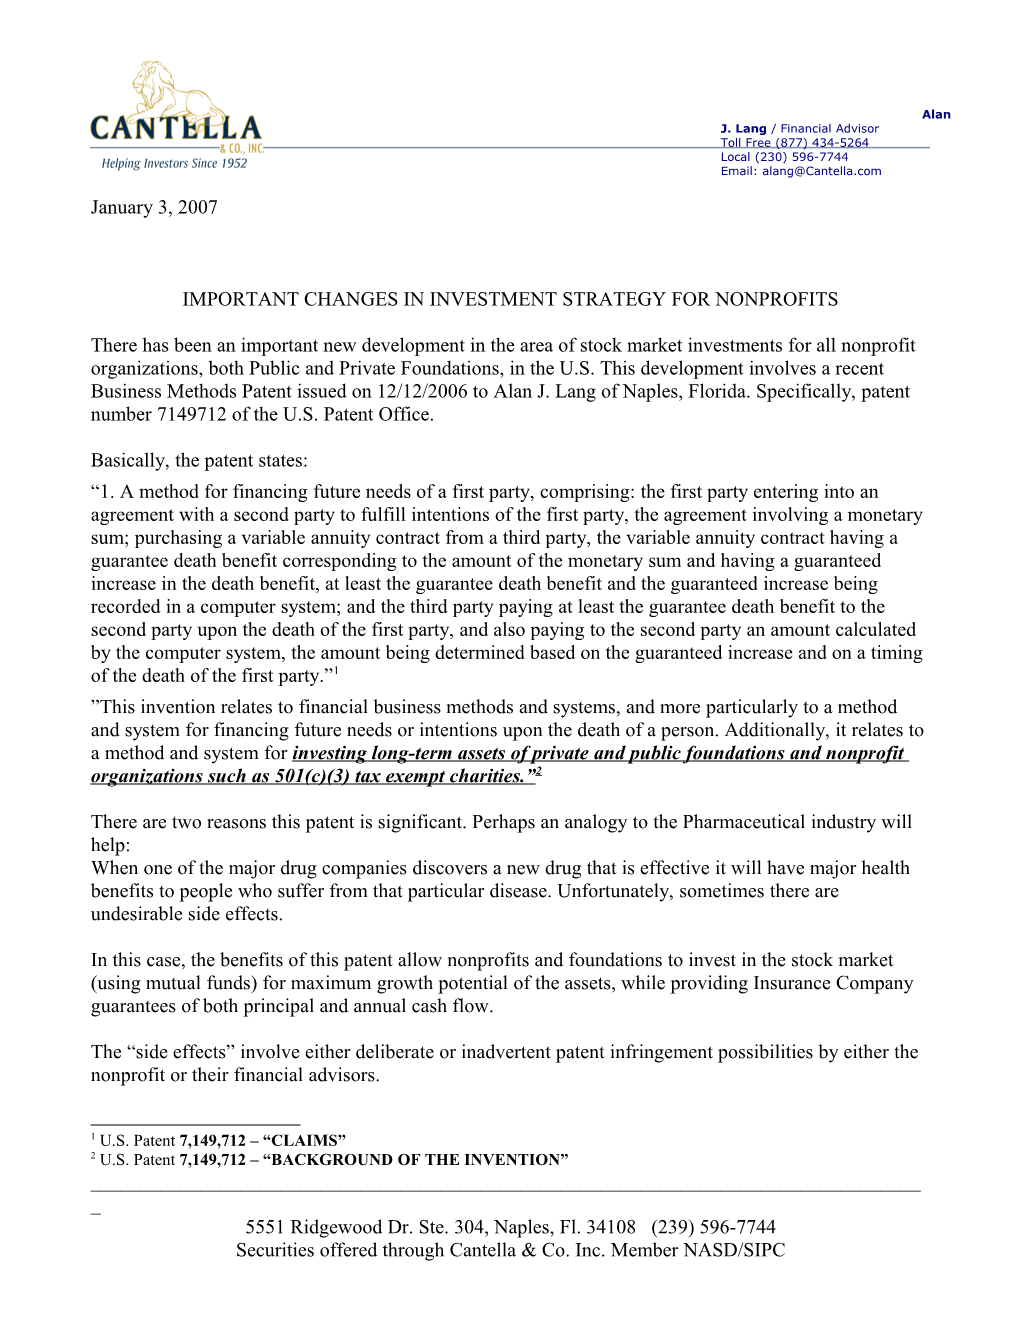 Letter from Alan Lang Warning Practitioners and Taxpayers About His CRT Patent - Jan. 3, 2007 s1